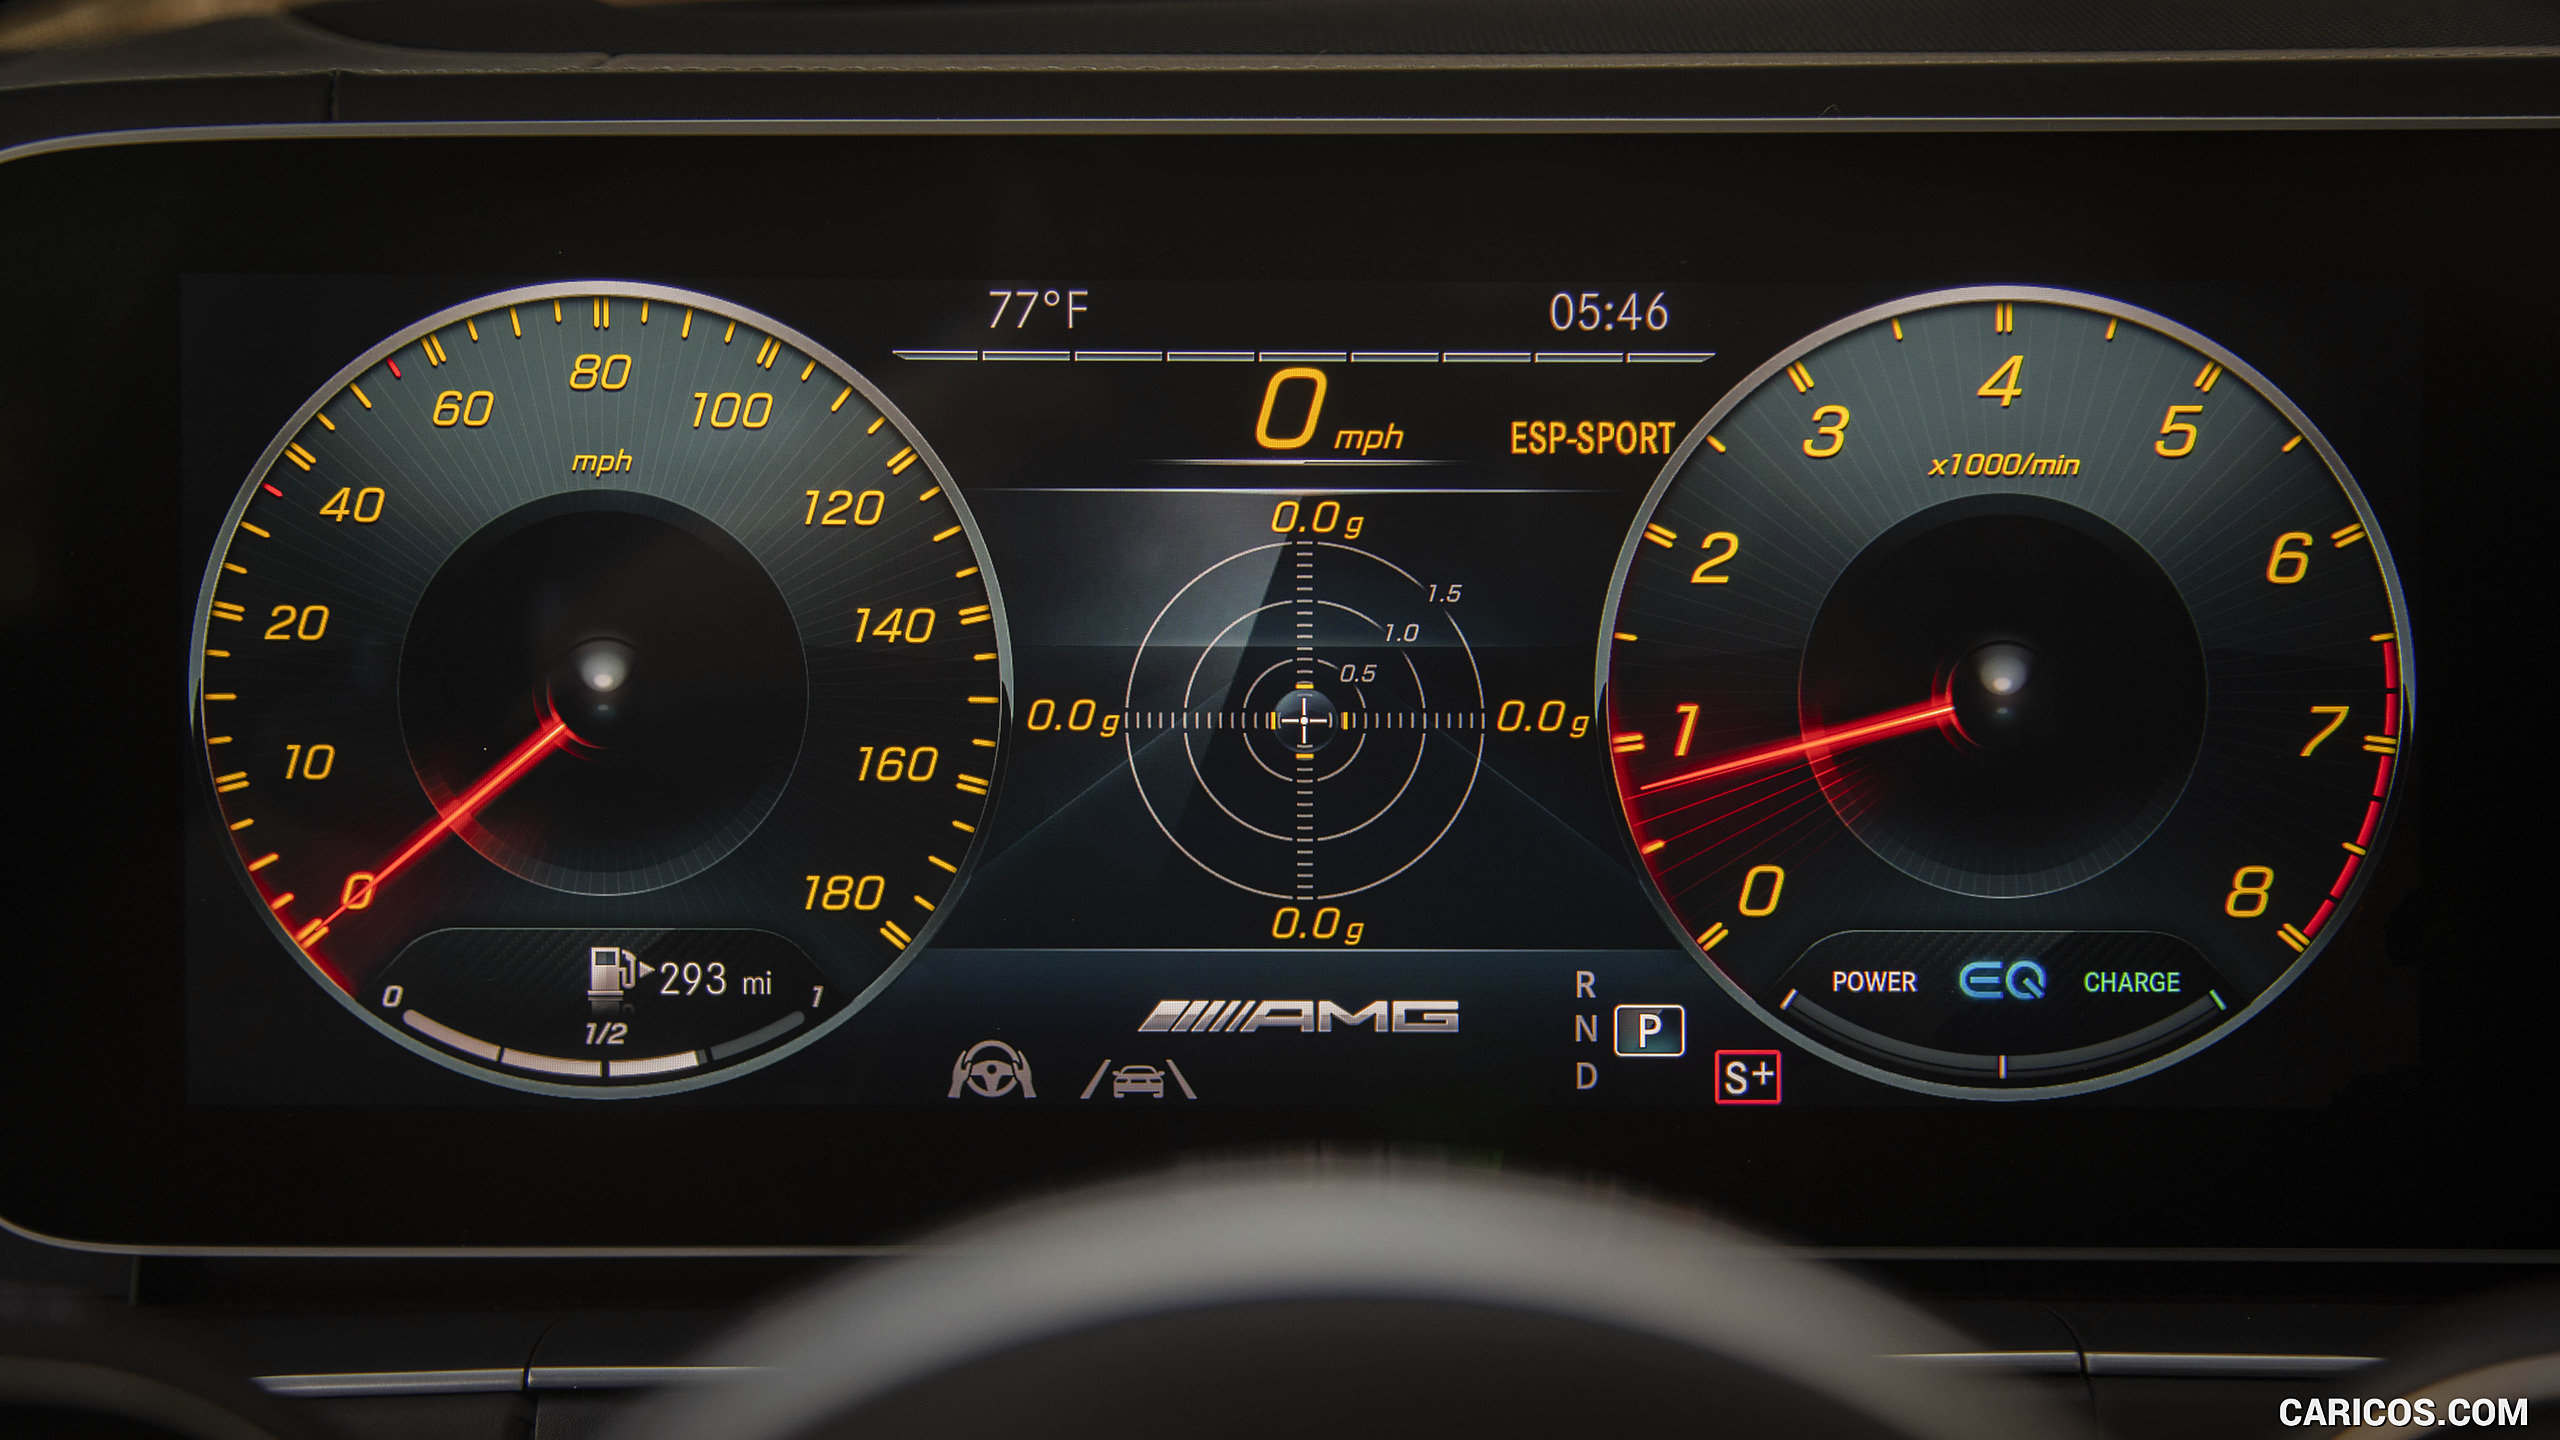 2021 Mercedes-AMG GLE 53 Coupe - Digital Instrument Cluster, #161 of 178